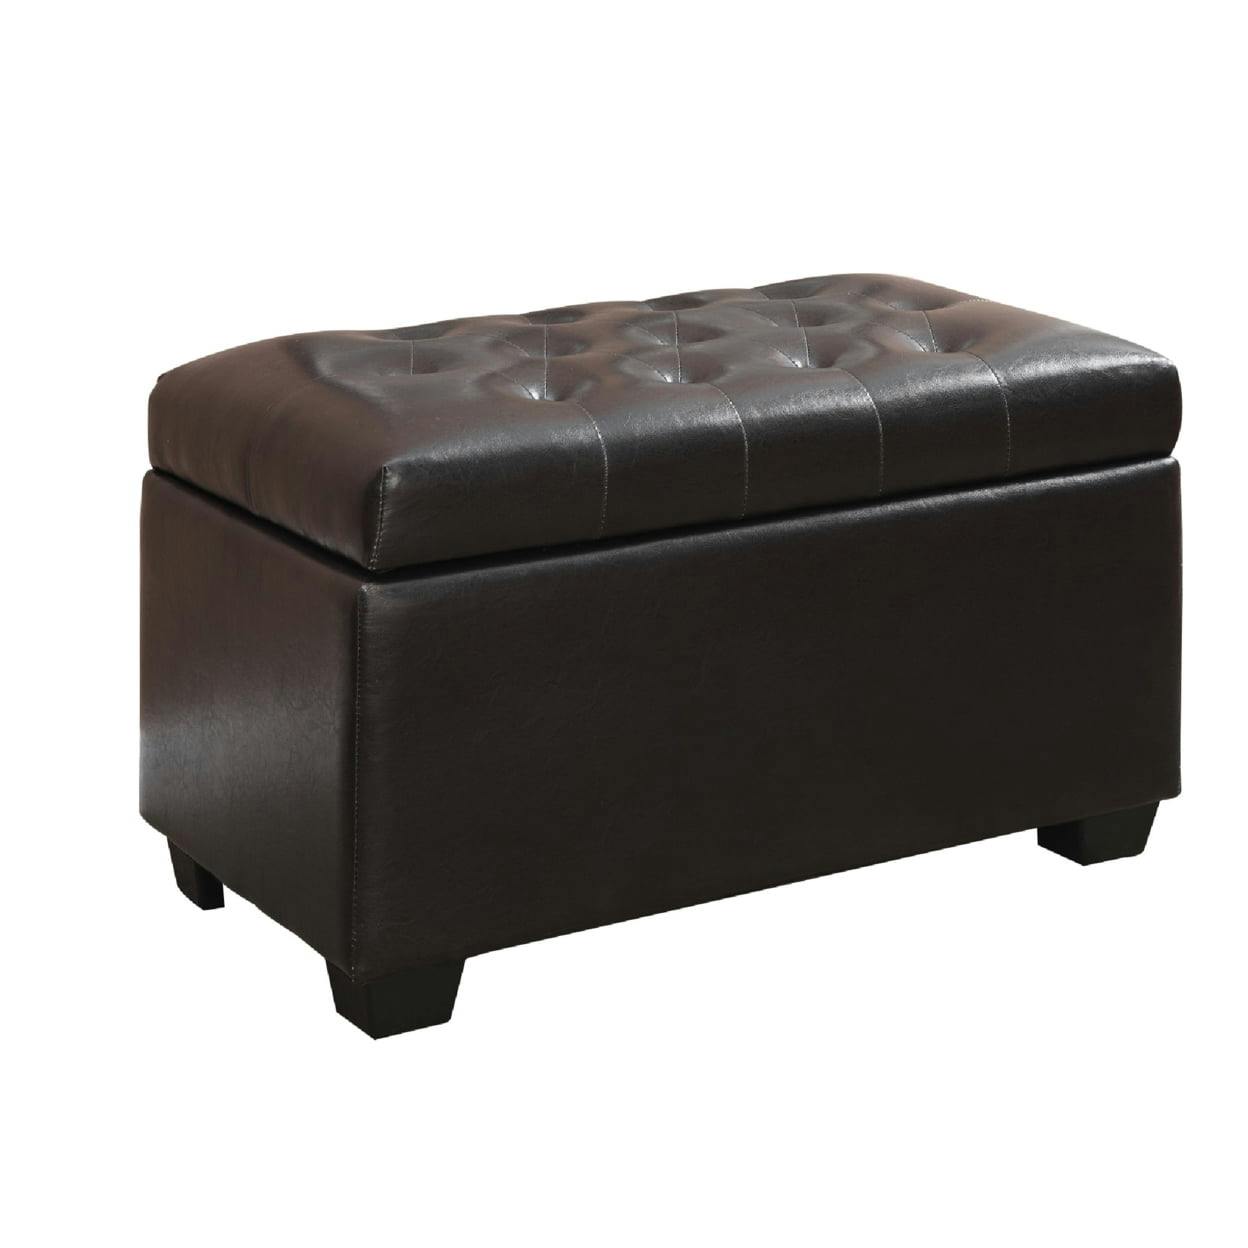 Contemporary Tufted Dark Brown Faux Leather Footstool with Storage